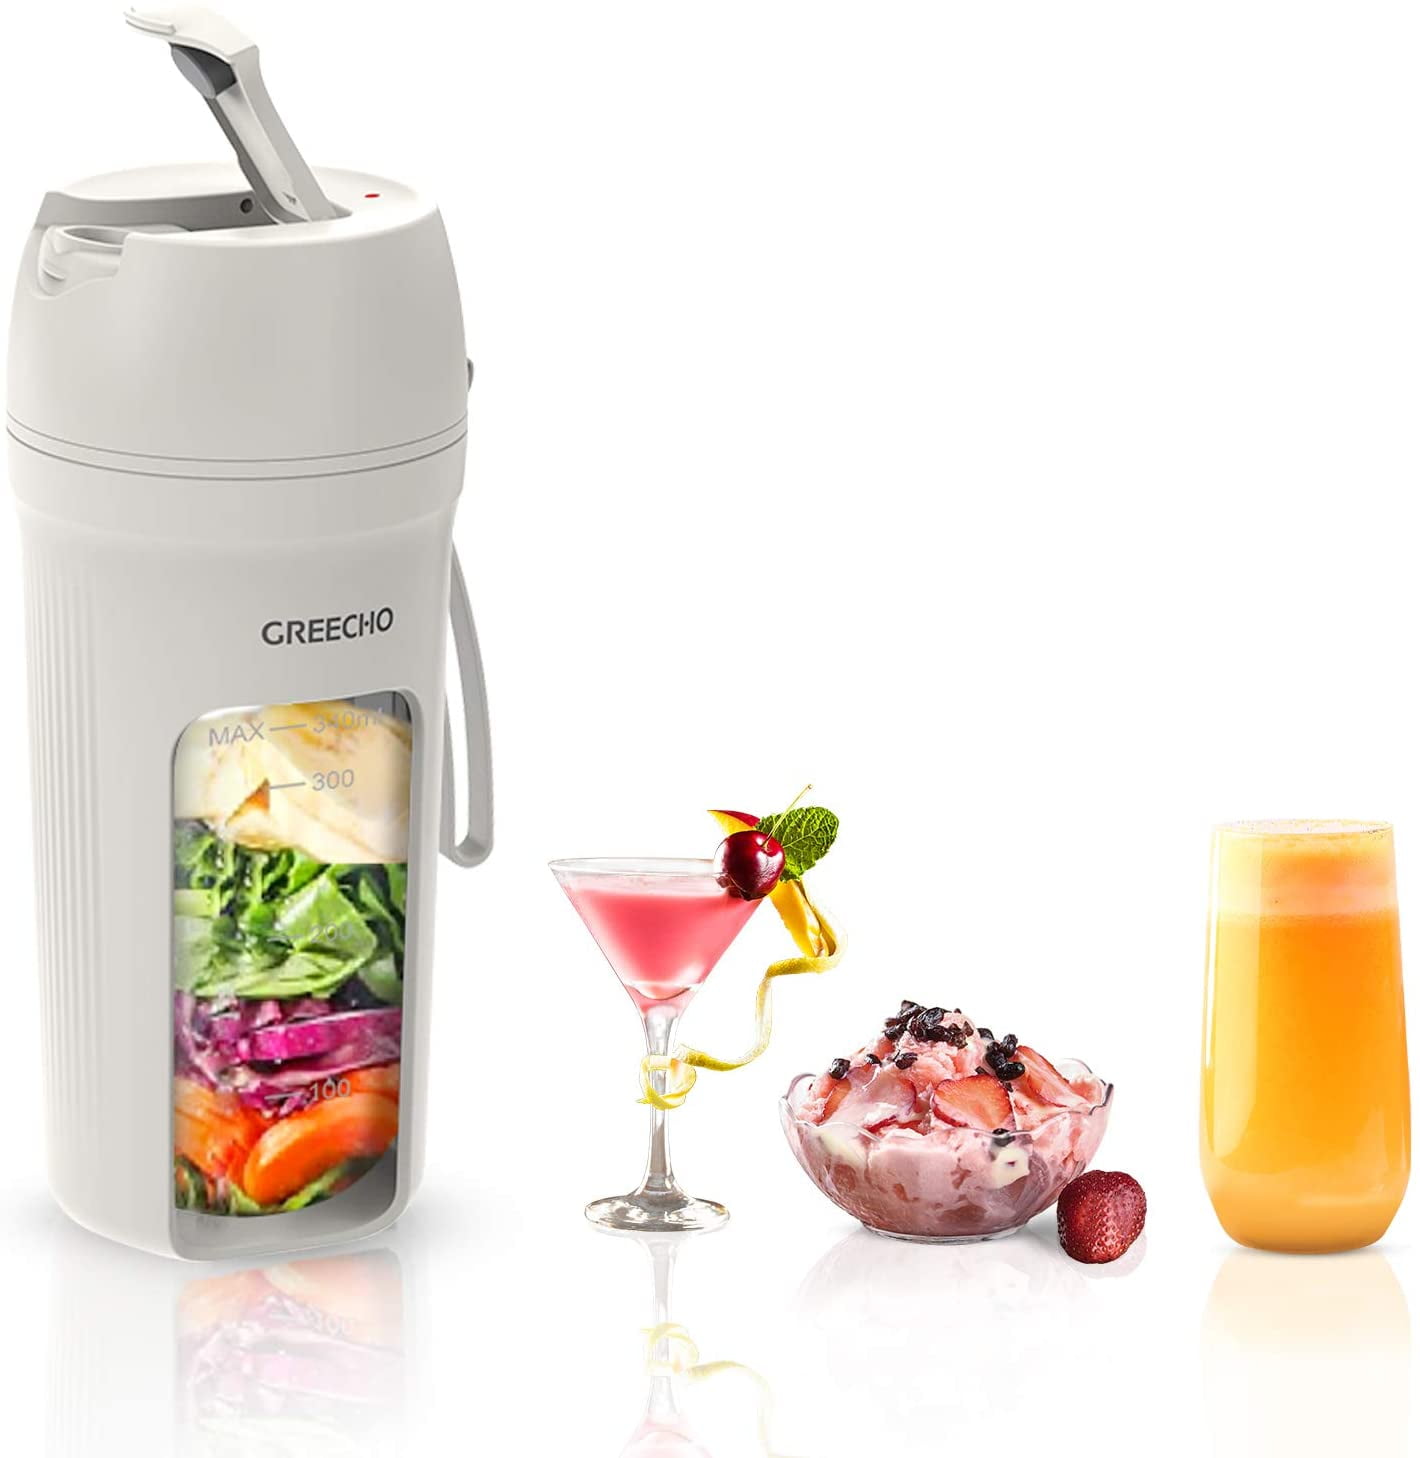 AiDot Ganiza 3-In-1 Portable Blender for Shakes and Smoothies